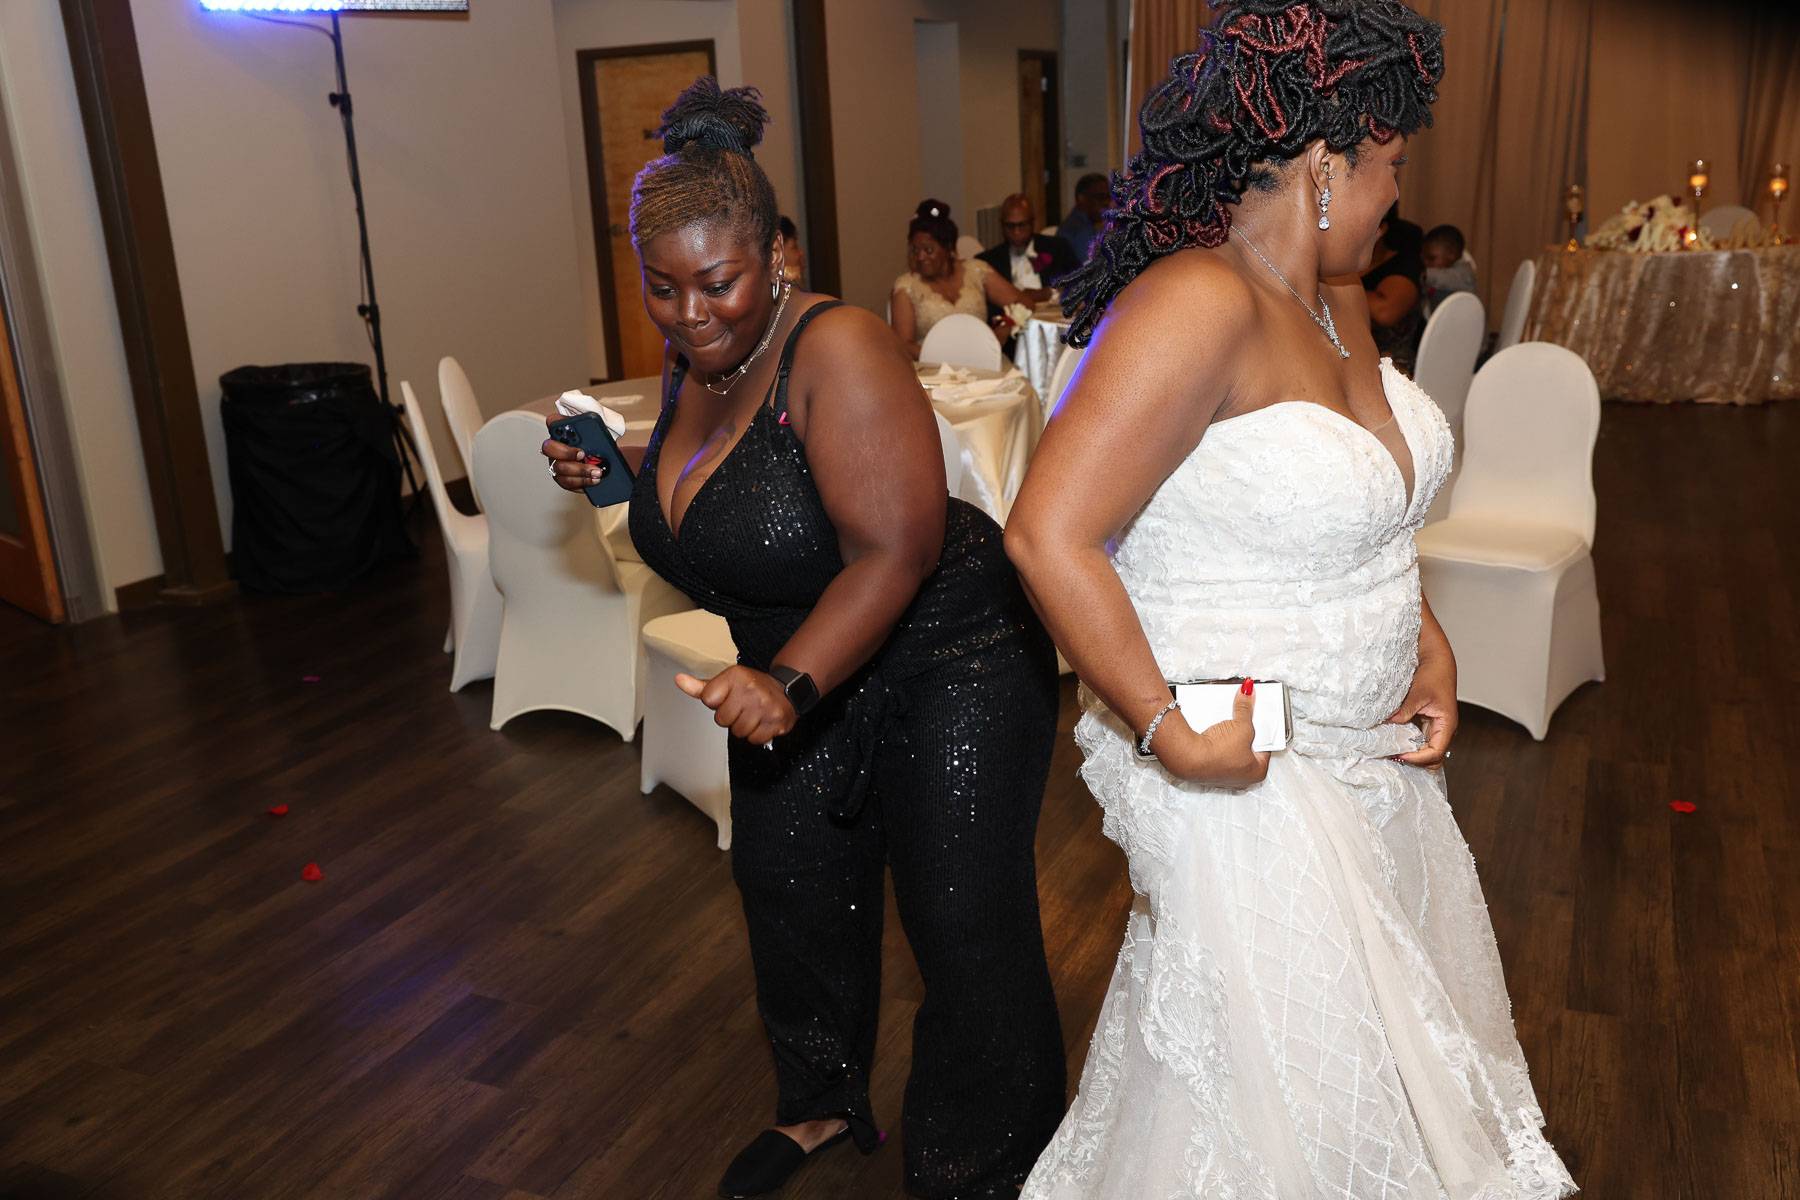 The bride dancing again with her guest